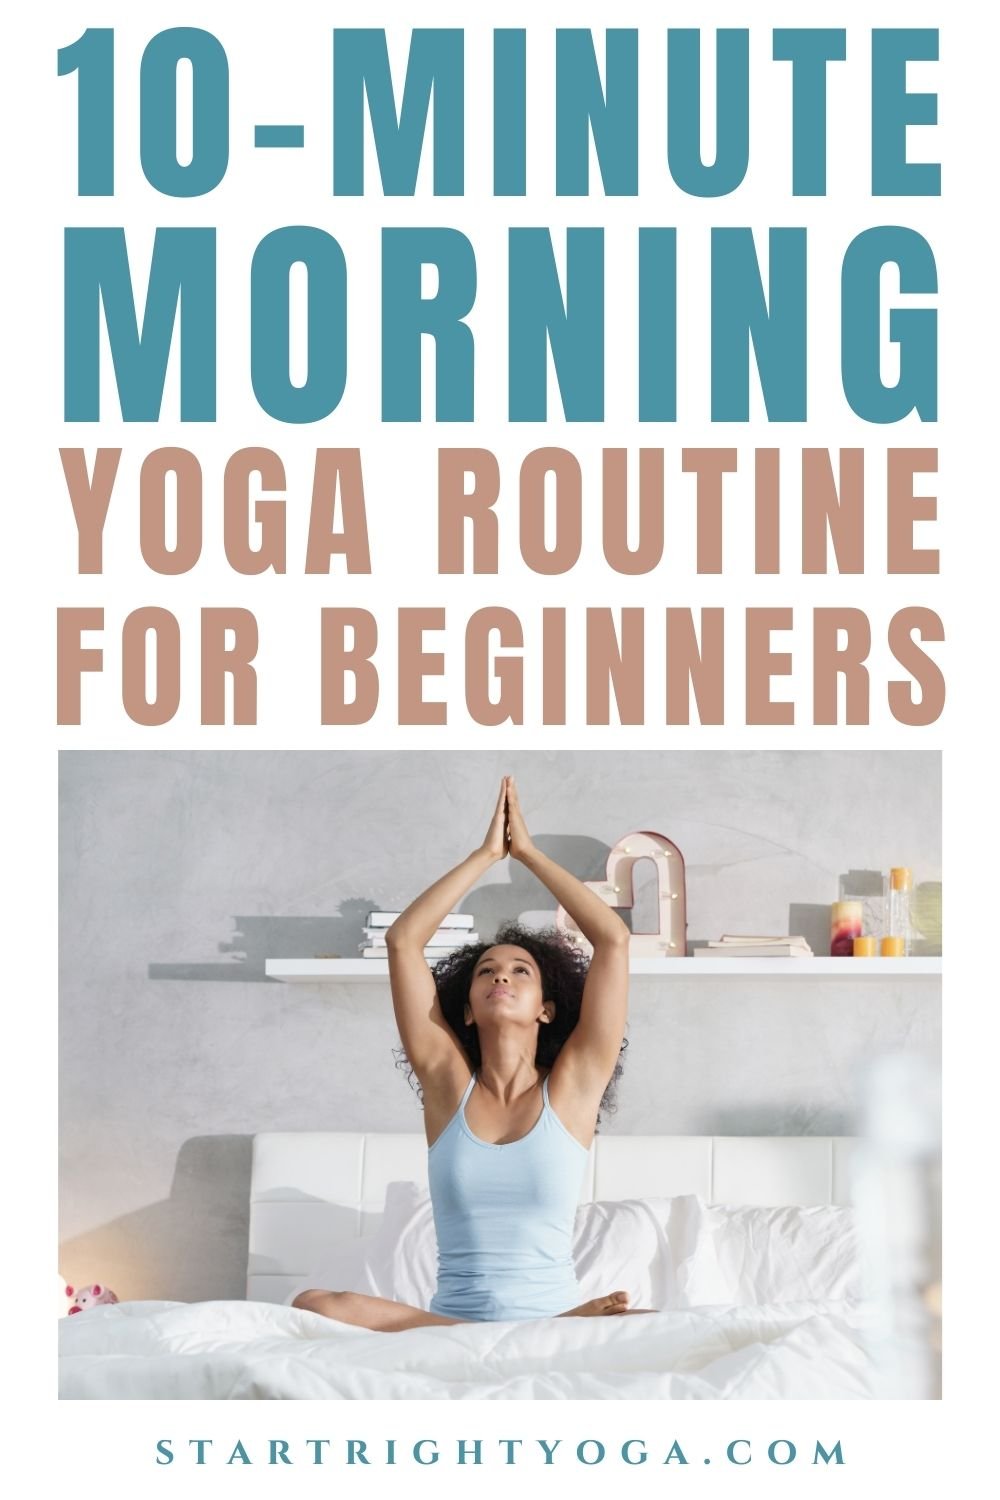 Morning Yoga Poses for Beginners at Home - YouTube